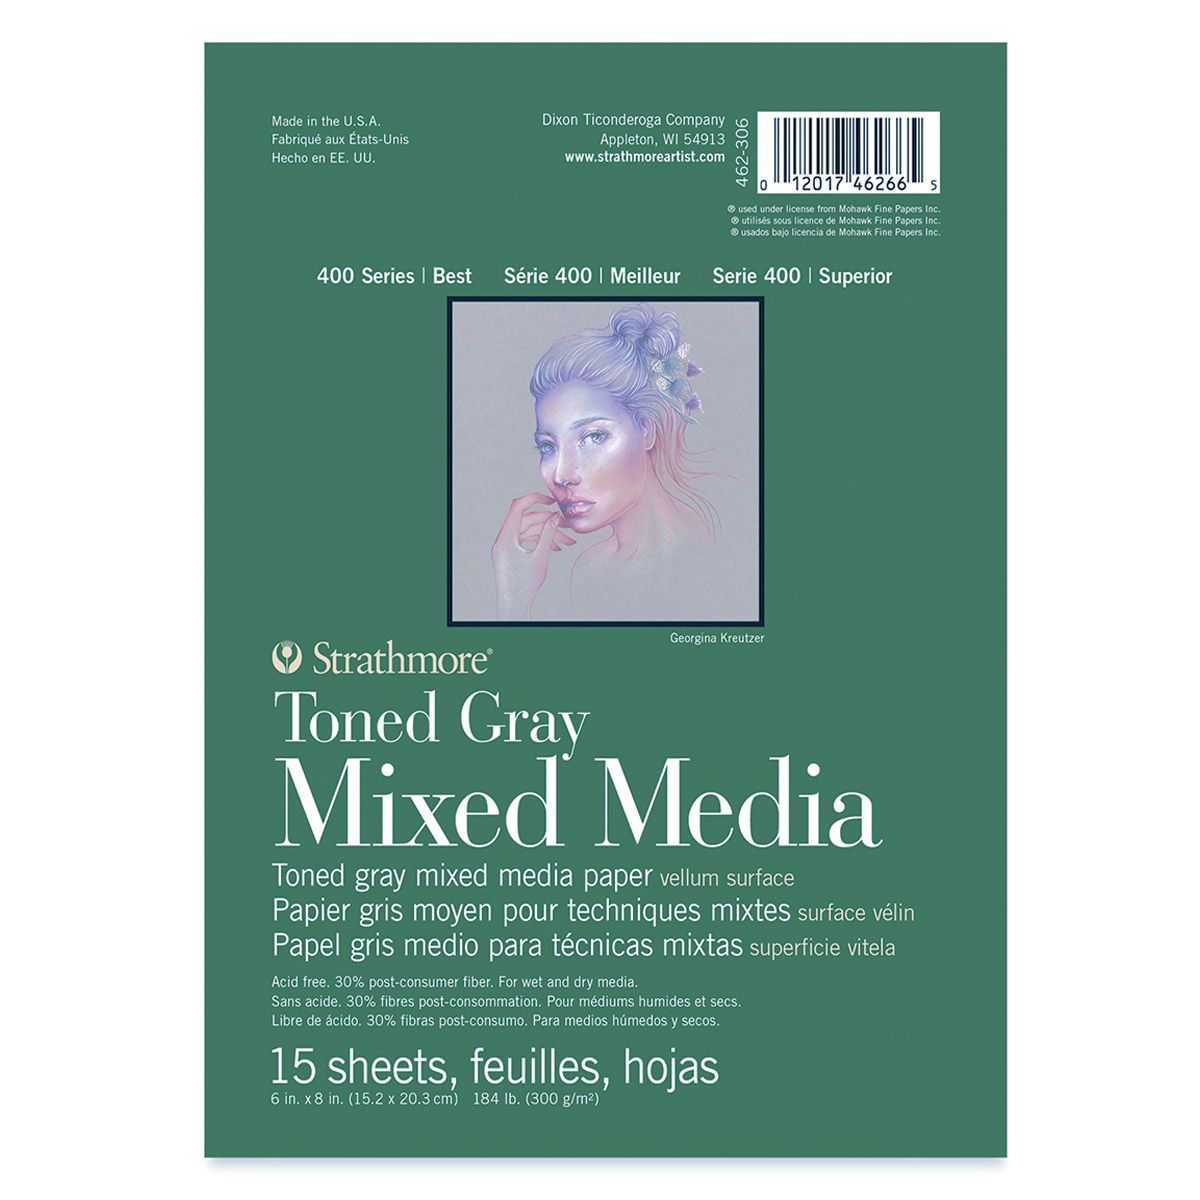 Strathmore 400 Series Toned Gray Mixed Media 5.5 x 8.5-inch Pad